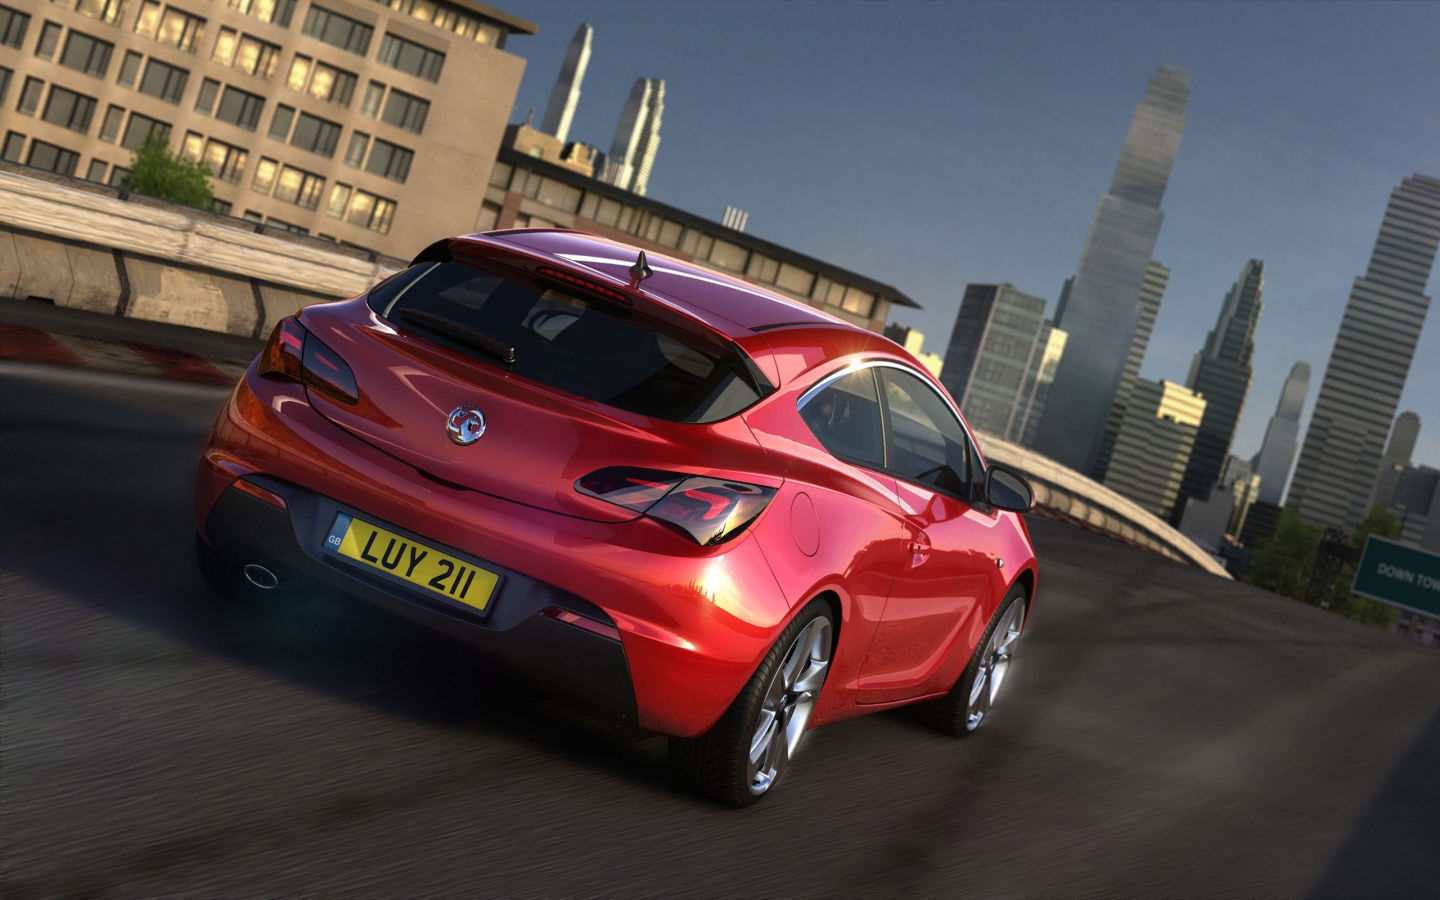 2012 Vauxhall Astra GTC Speed for 1440 x 900 widescreen resolution